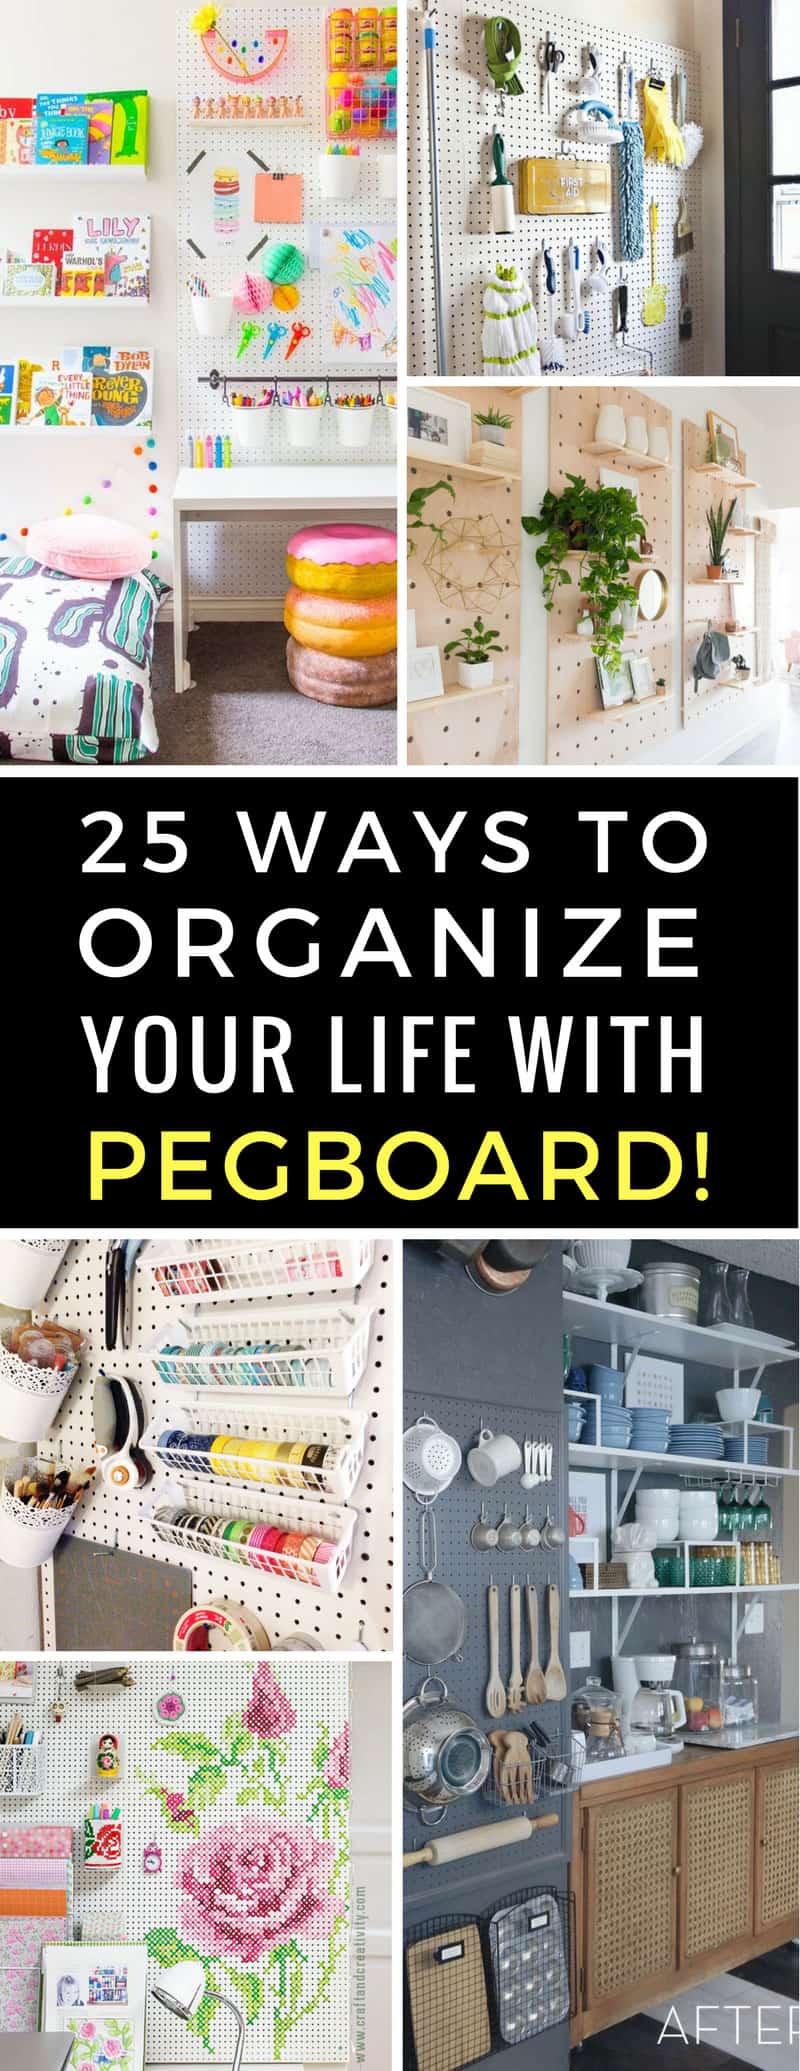 If you thought pegboards were just for garage organization think again! You can use them in the kitchen, the craft room, the bedroom and the craft room! Click through to see all of the pegboard pictures and ideas! | Organization | Storage Solutions | Pegboards | Just Bright Ideas